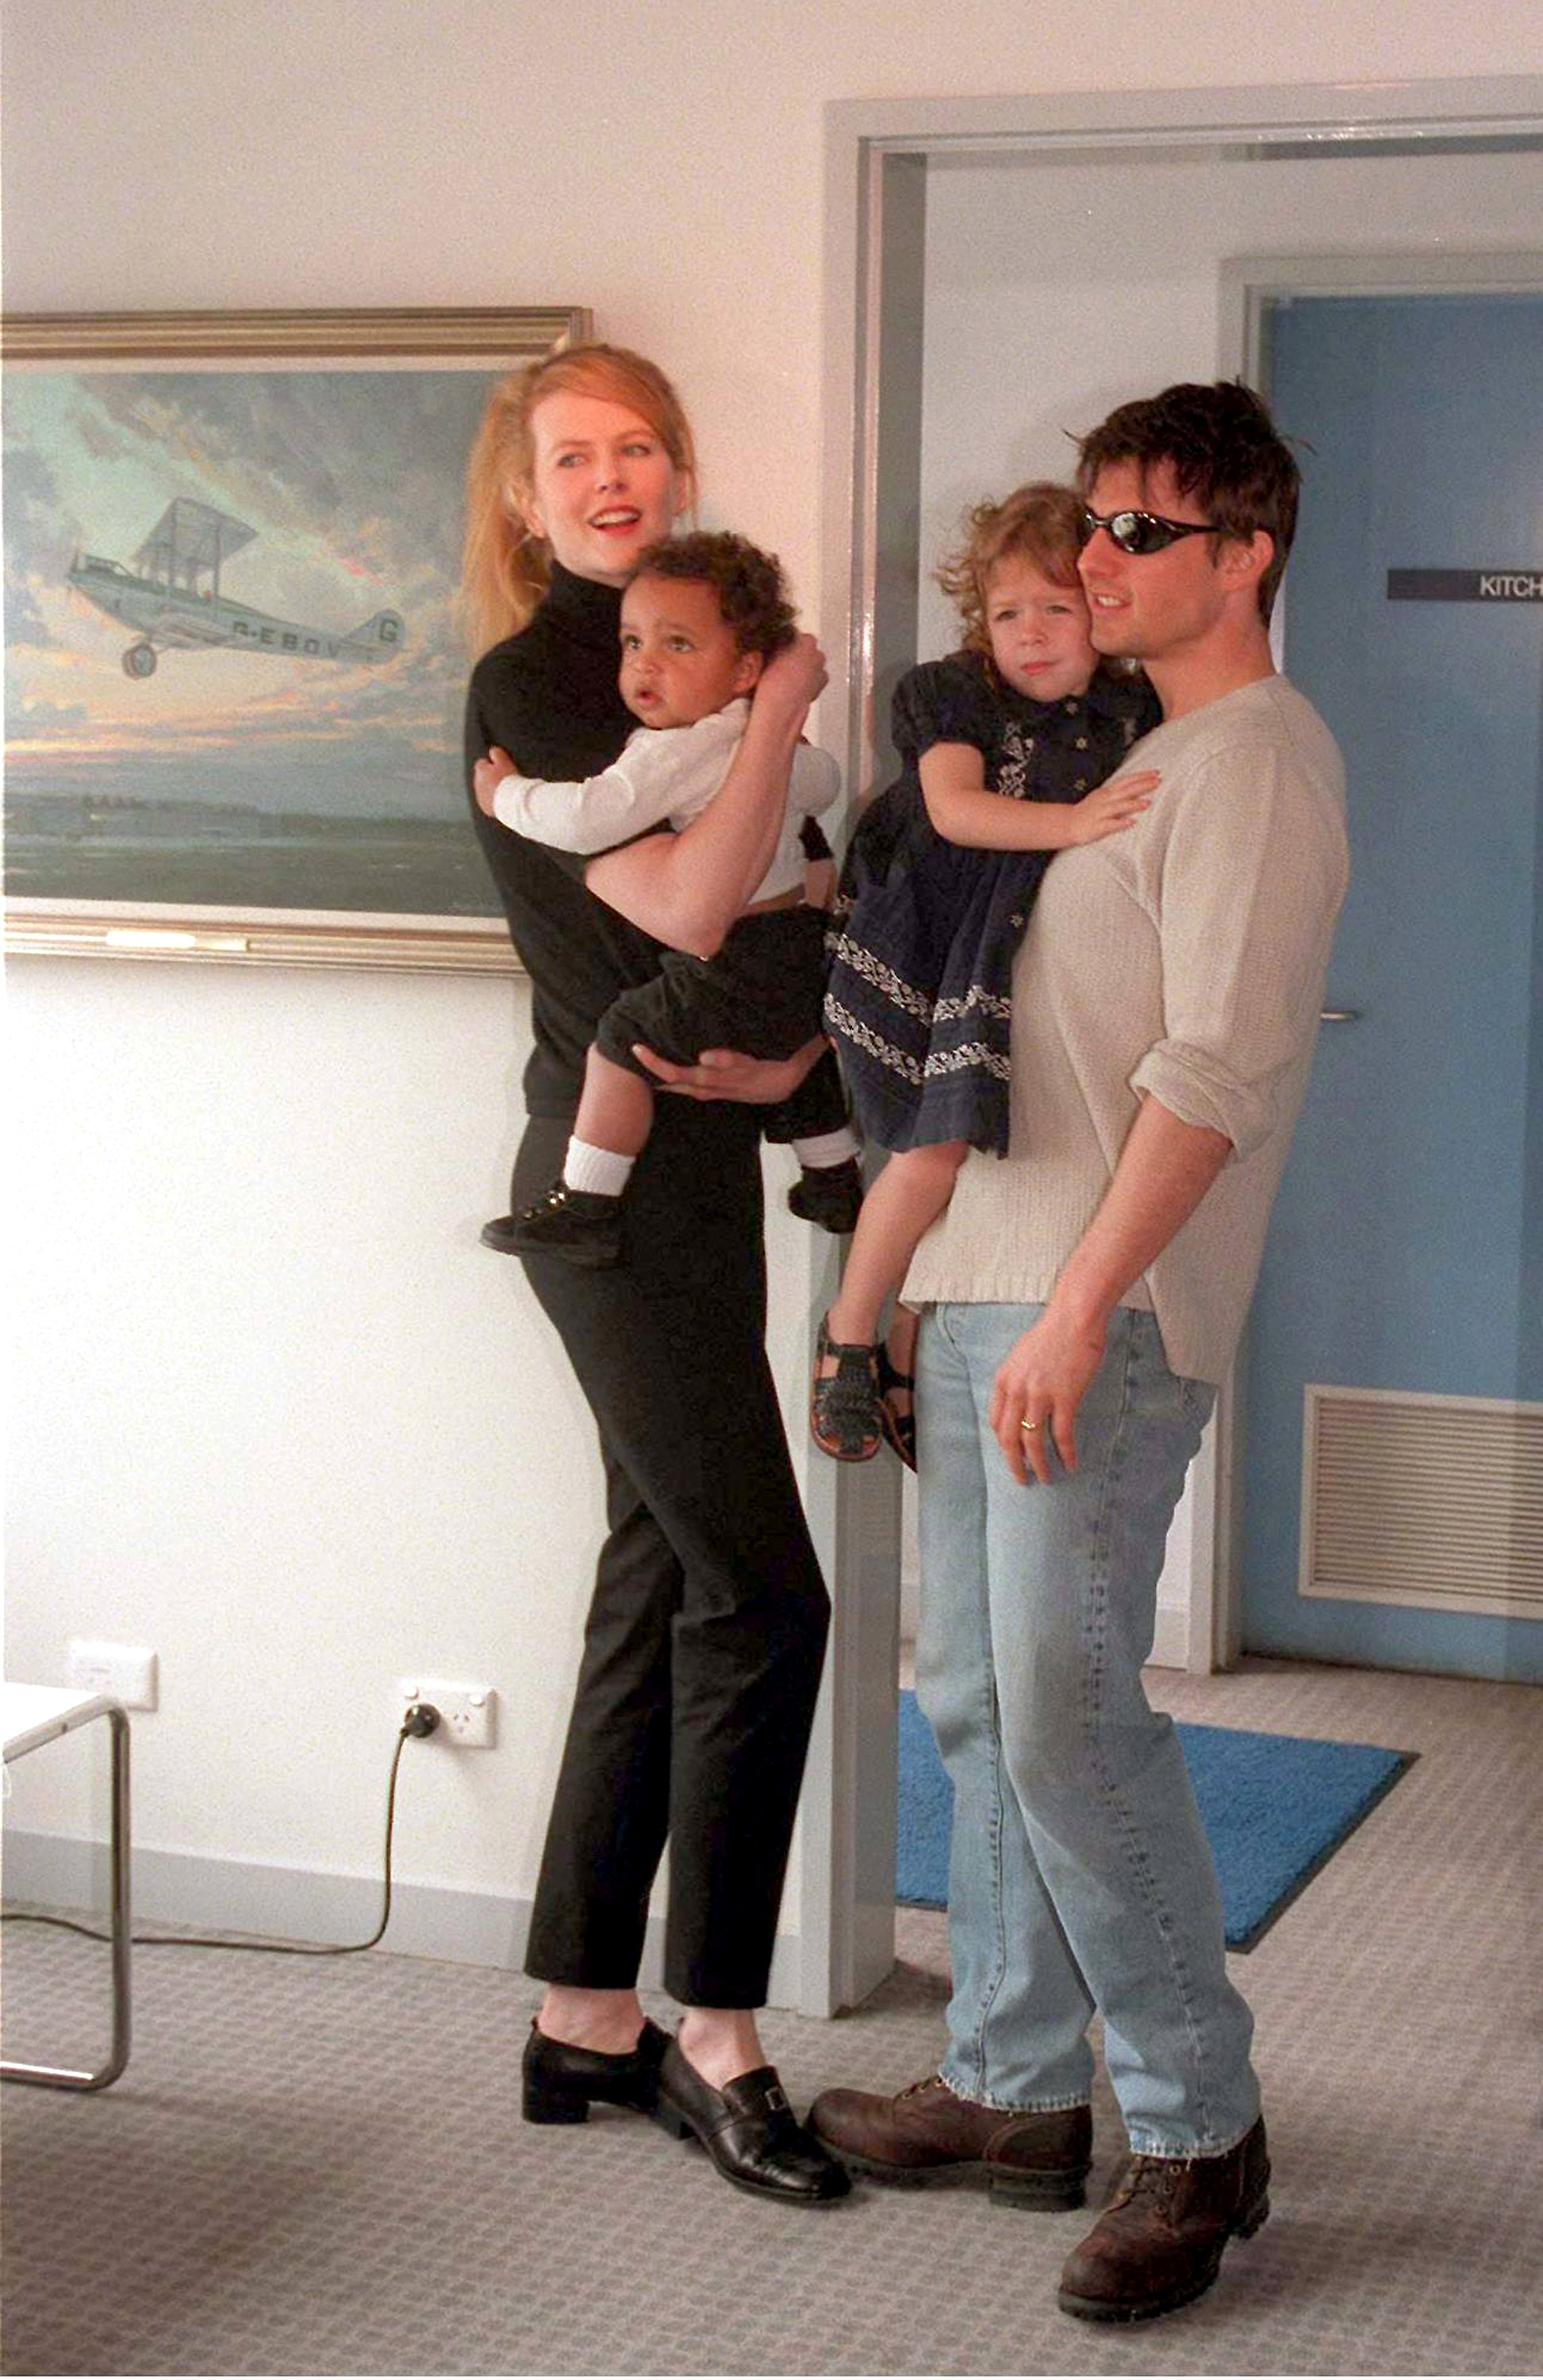 Nicole Kidman and Tom Cruise with Isabella and Connor Cruise at Sydney Kingsford Smith airport and introduce their children Connor and Isabella to the media January 24, 1996 | Source: Getty Images